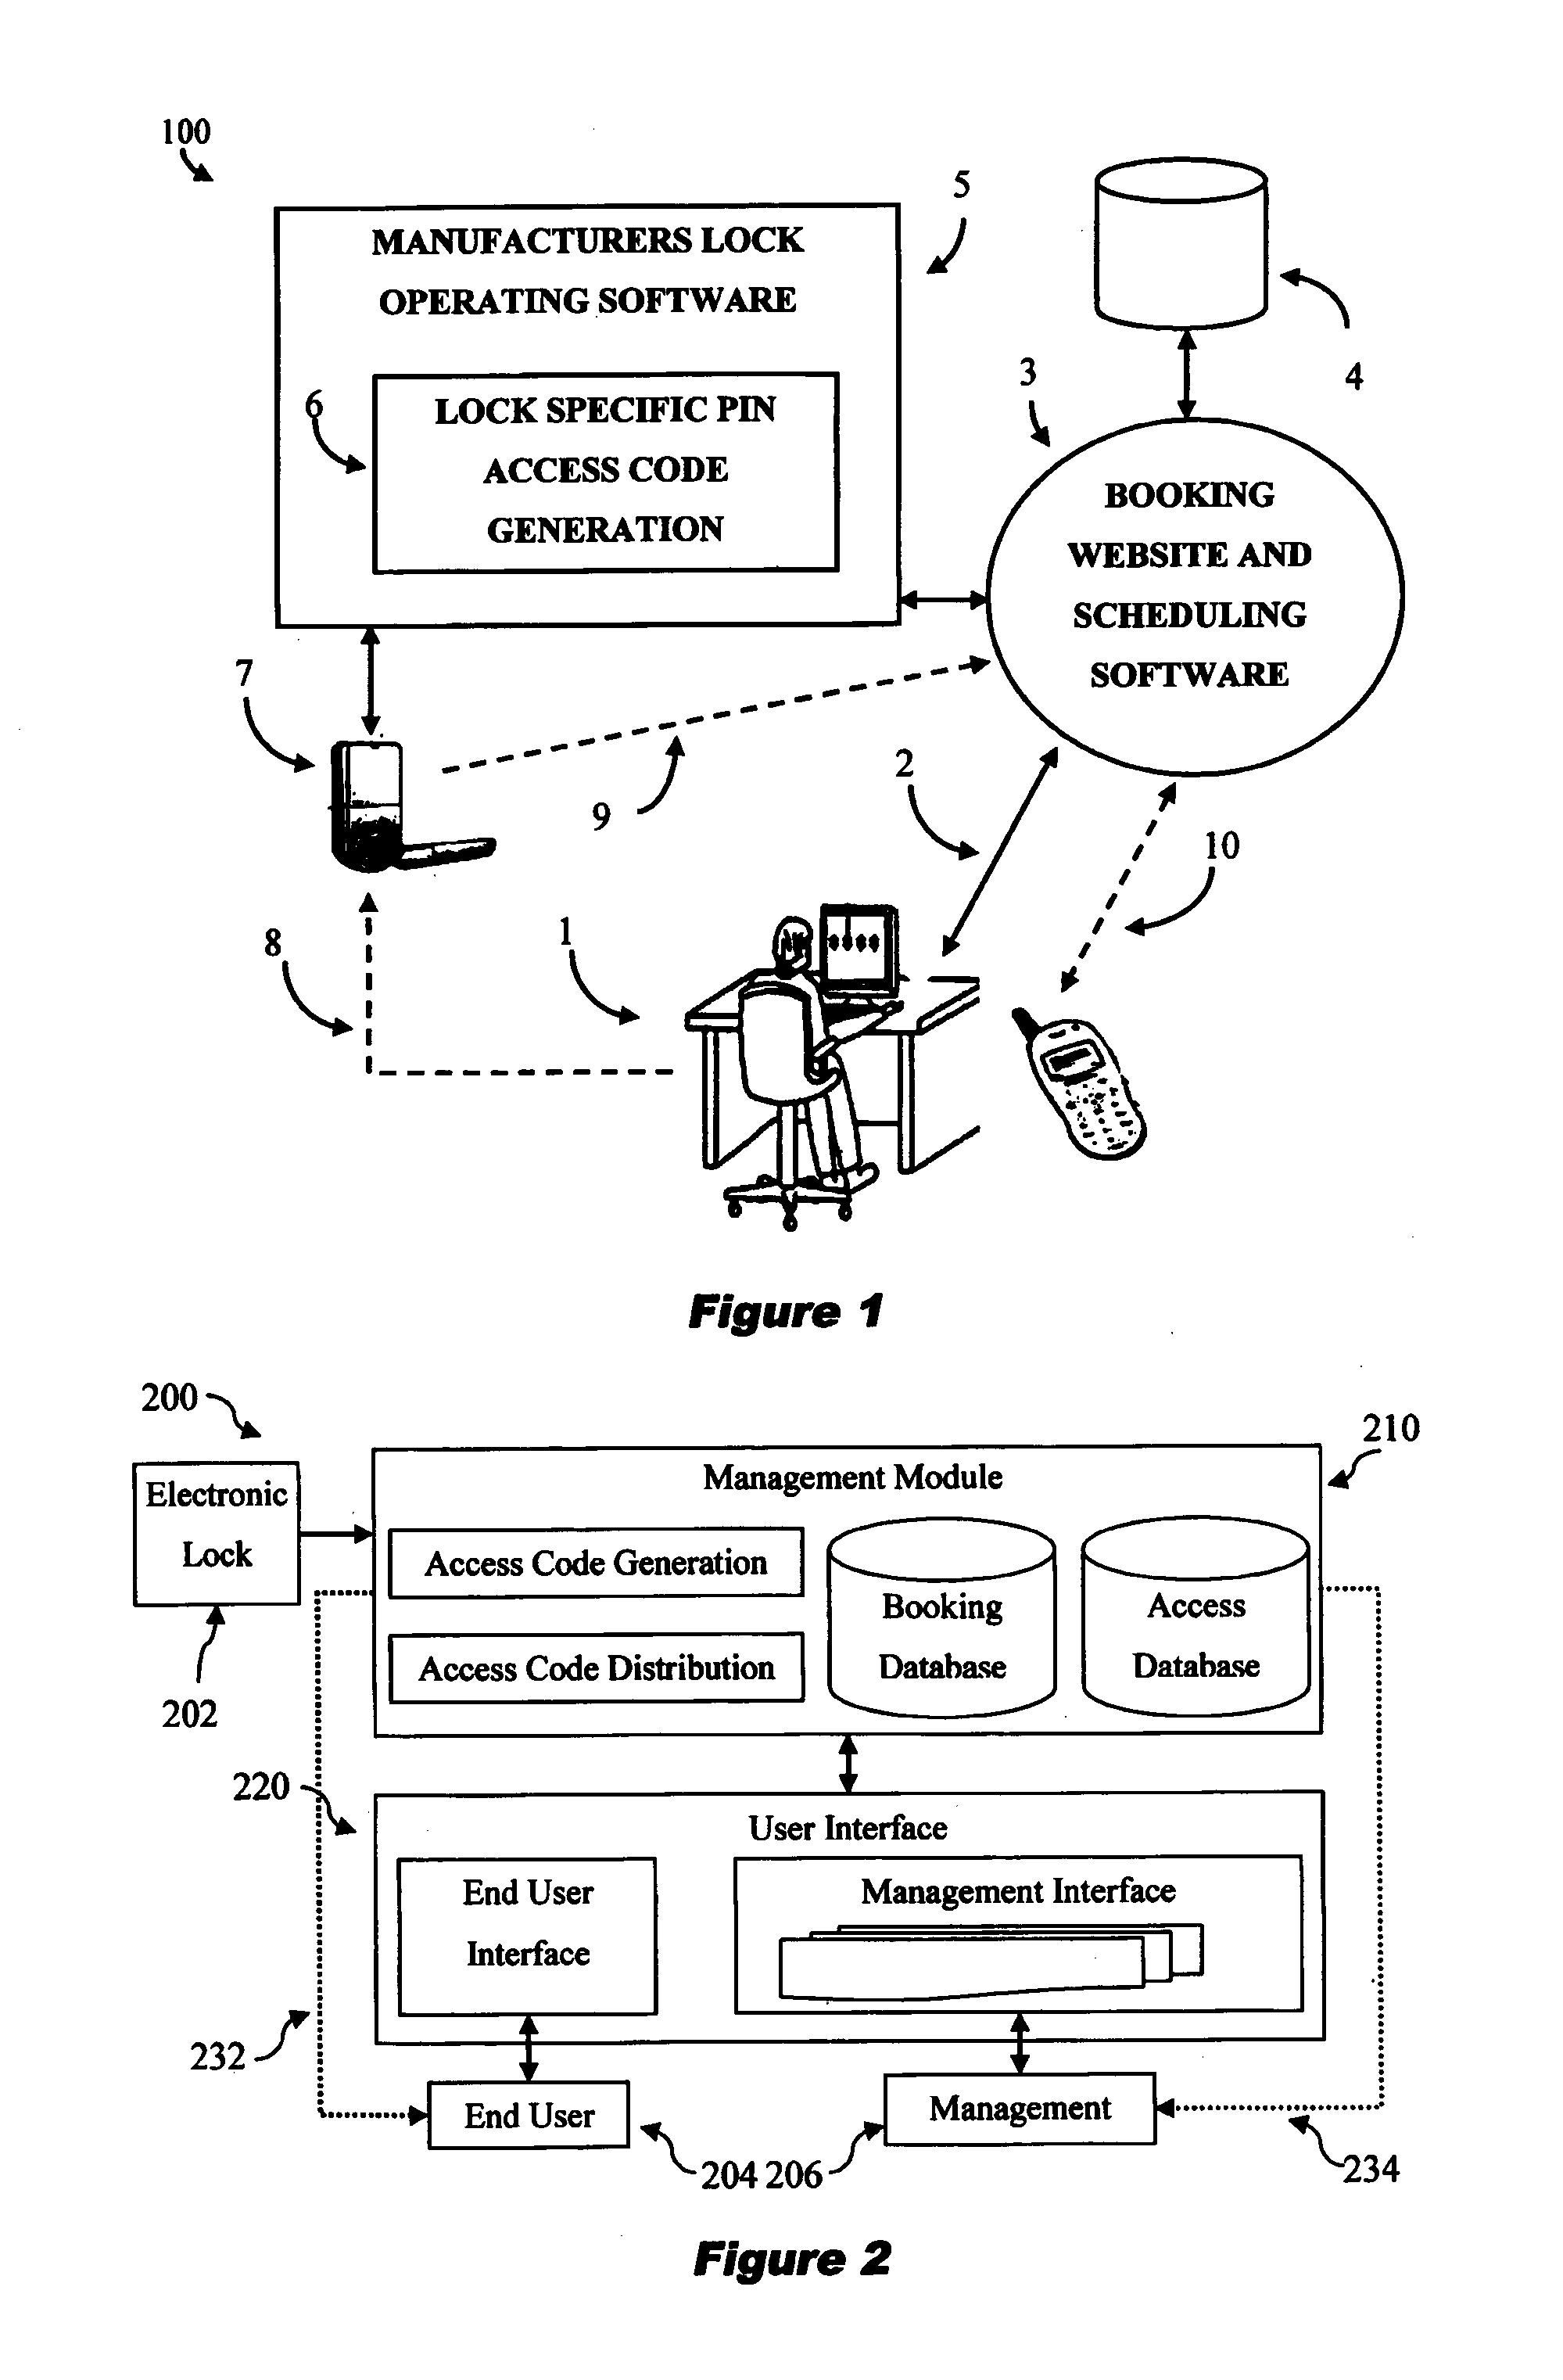 System and method for controlling access to electronic locks